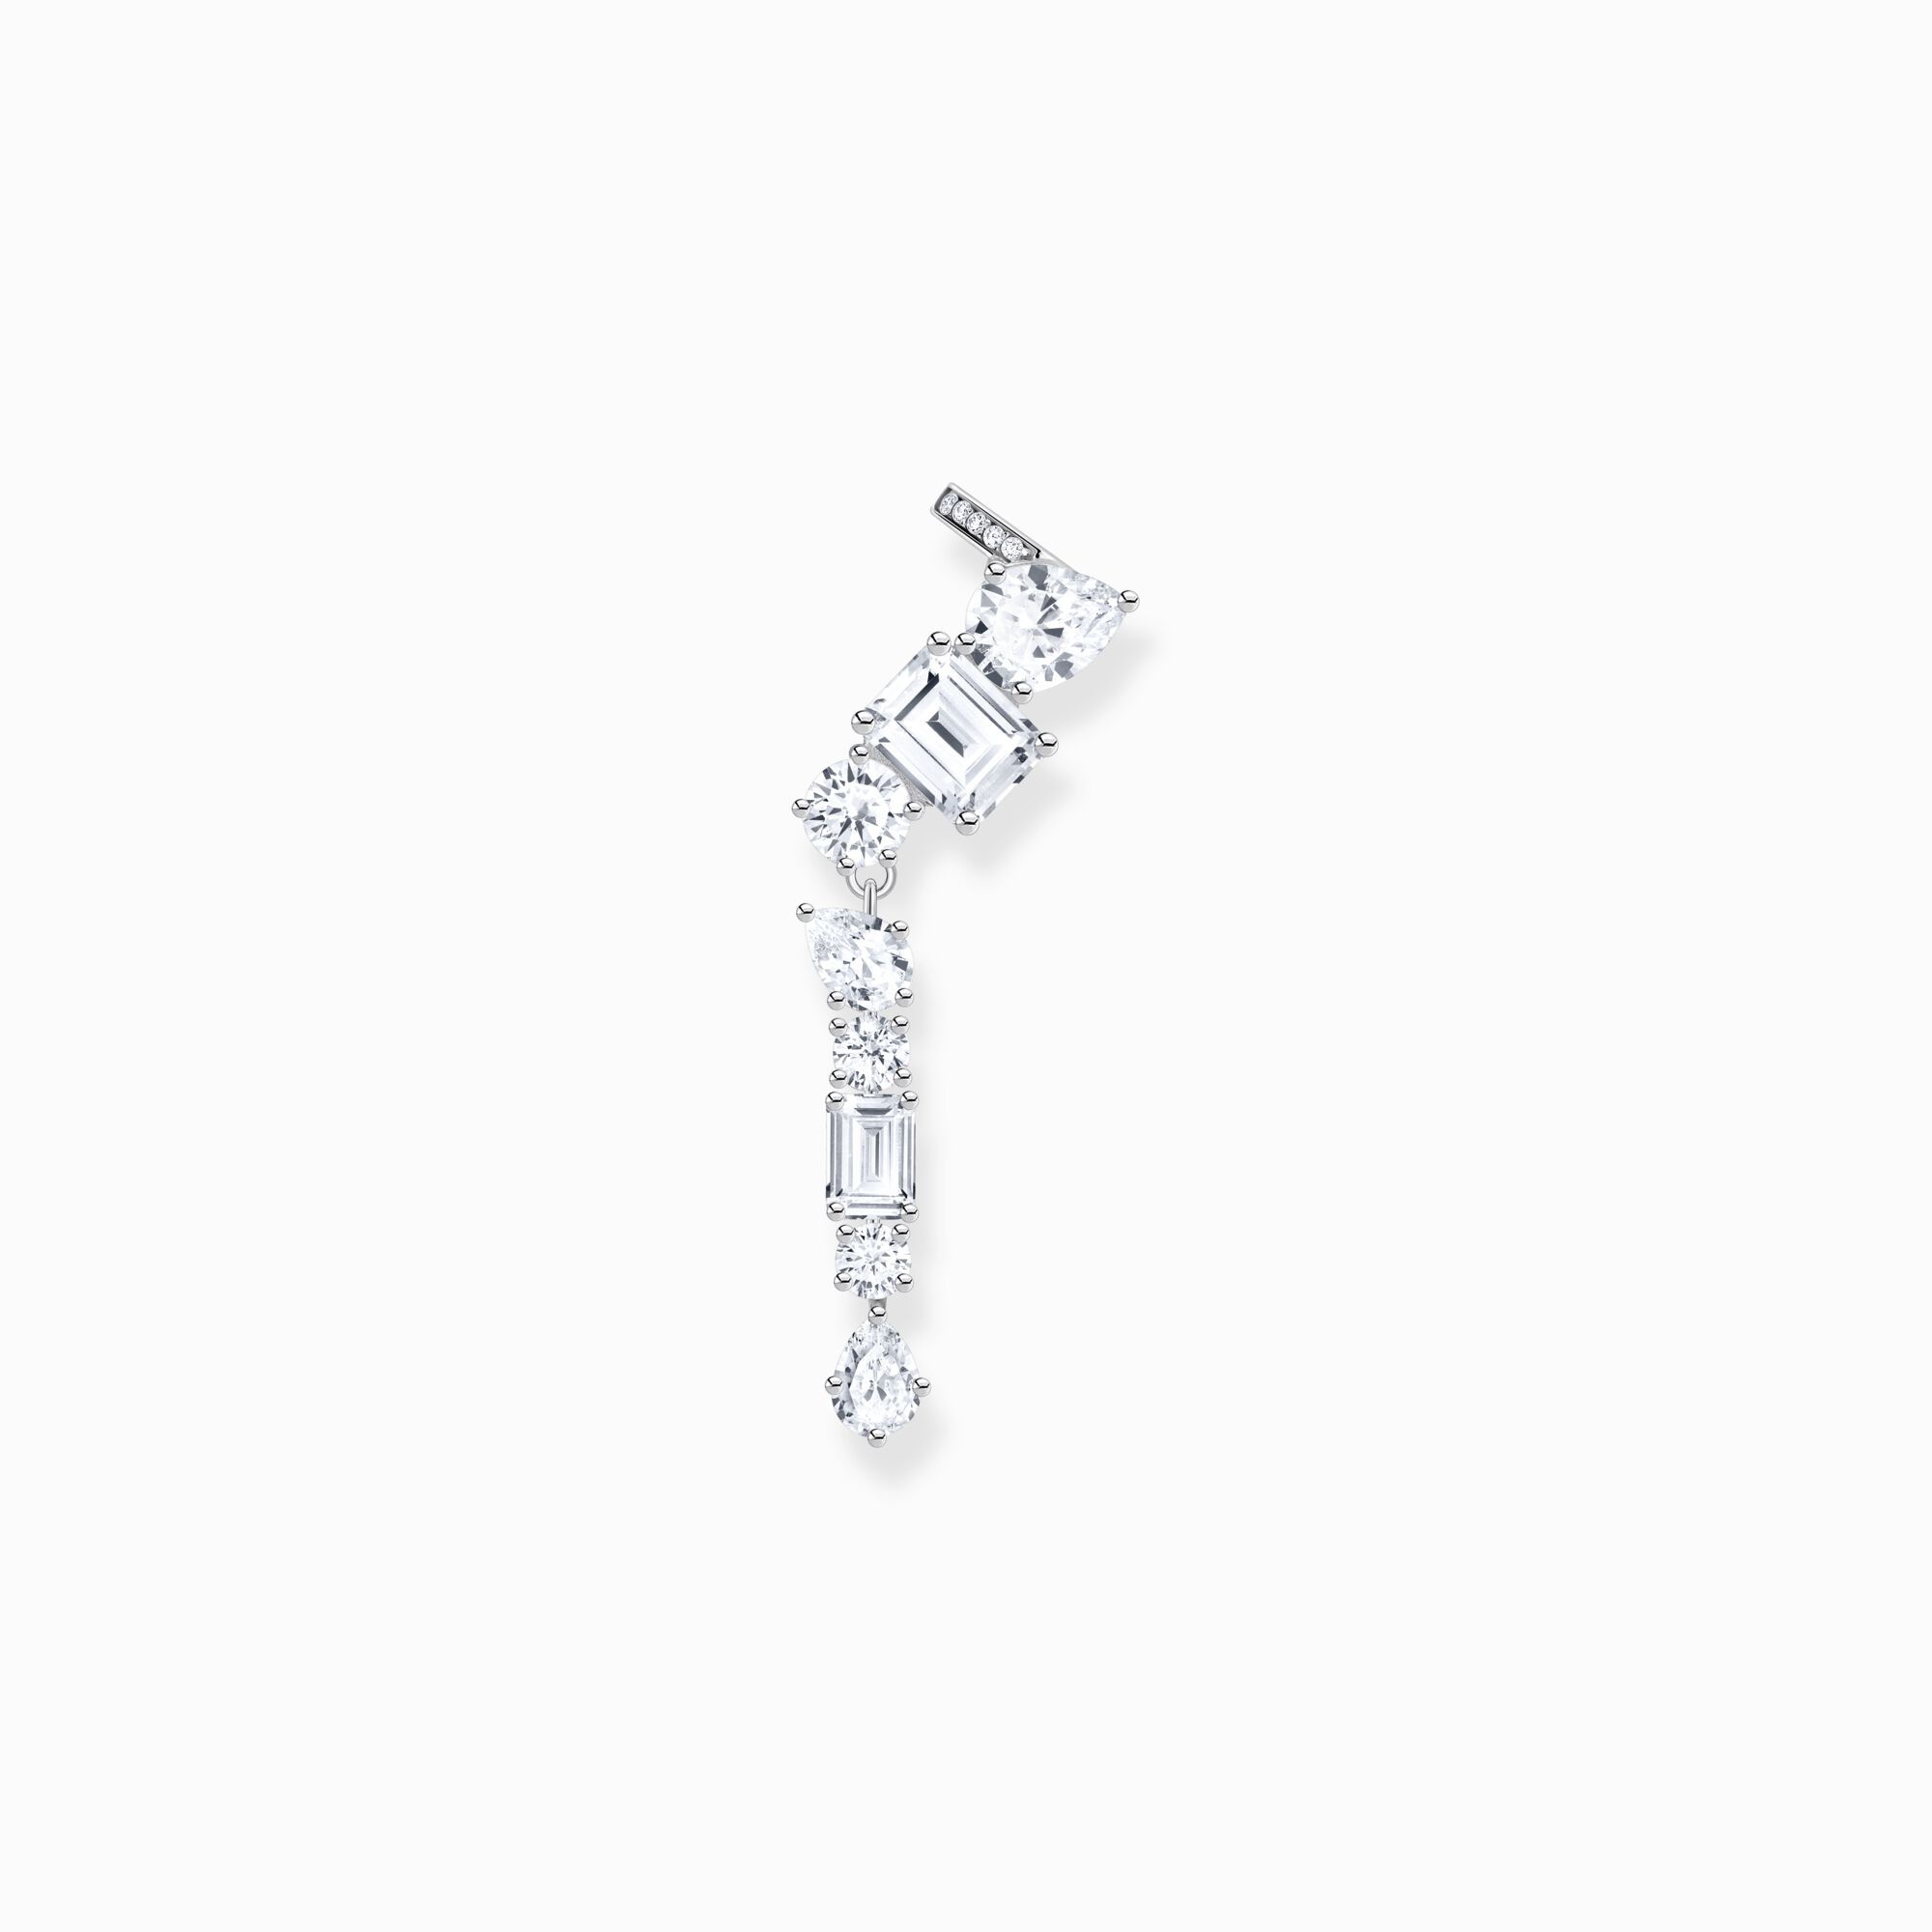 Silver single ear stud in ear climber style with white zirconia from the  collection in the THOMAS SABO online store